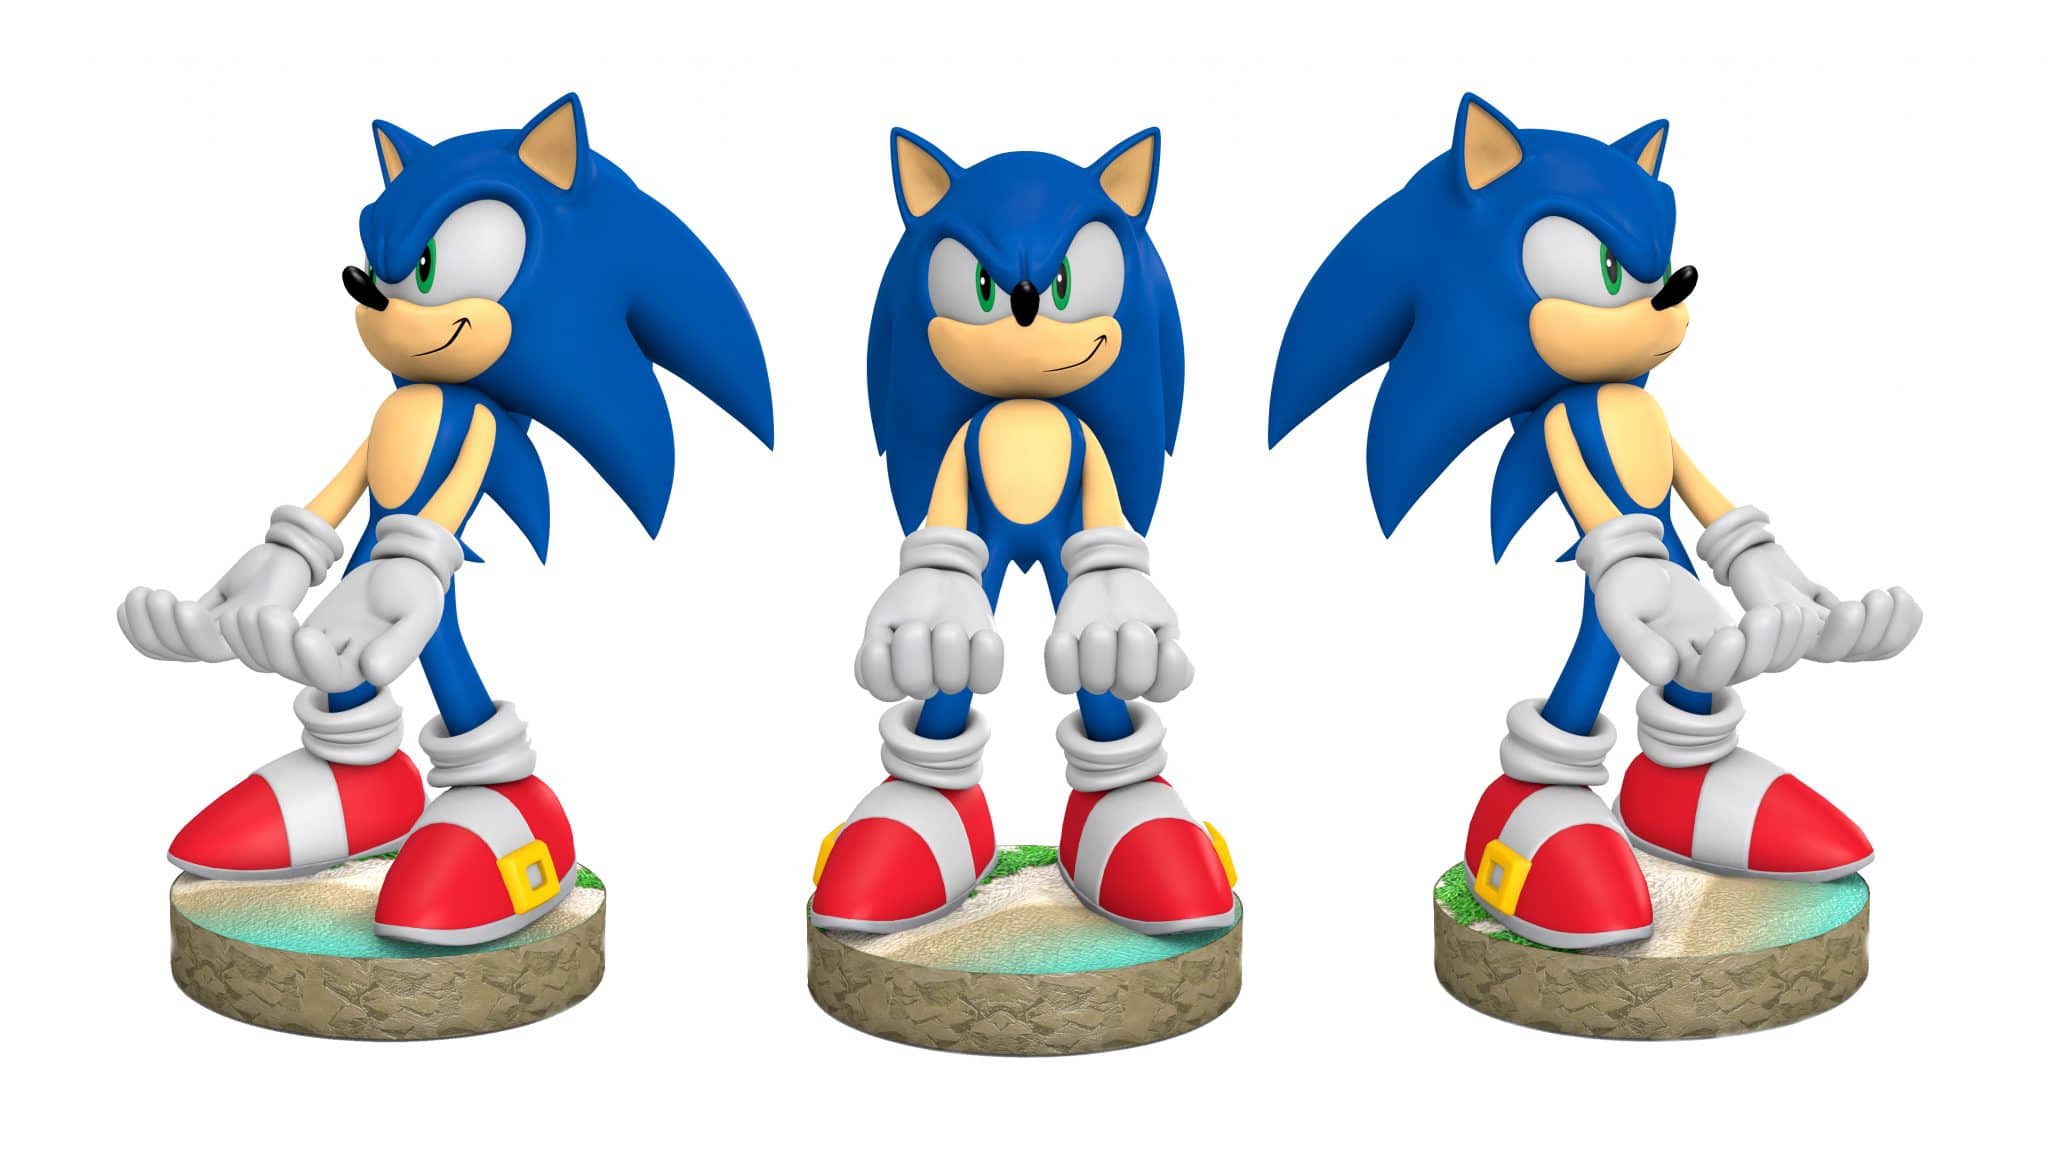 https://noisypixel.net/wp-content/uploads/2022/06/Modern-Sonic-Cable-Guy-copy-scaled.jpg